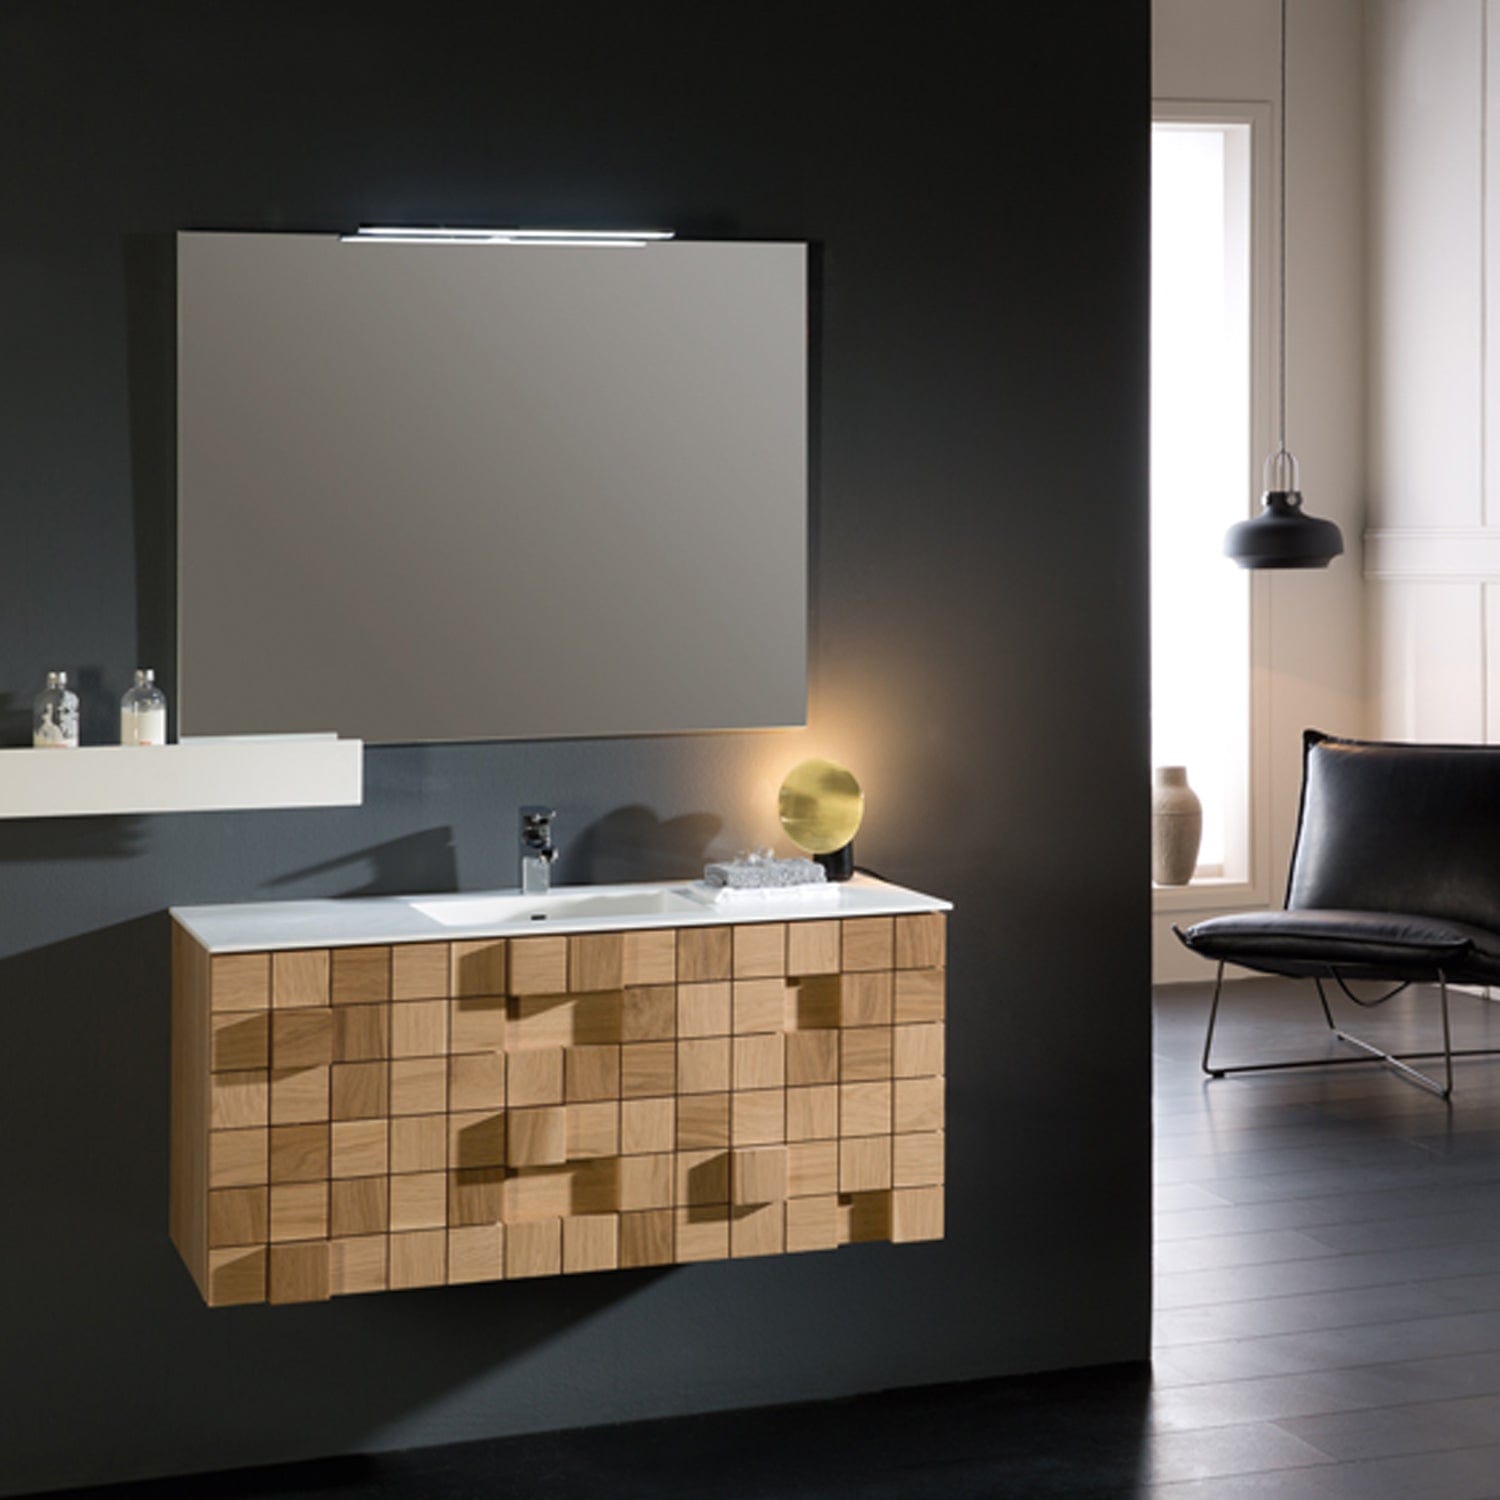 Eviva Mosaic 48" Wall Mounted Oak Bathroom Vanity with White Integrated Solid Surface Countertop